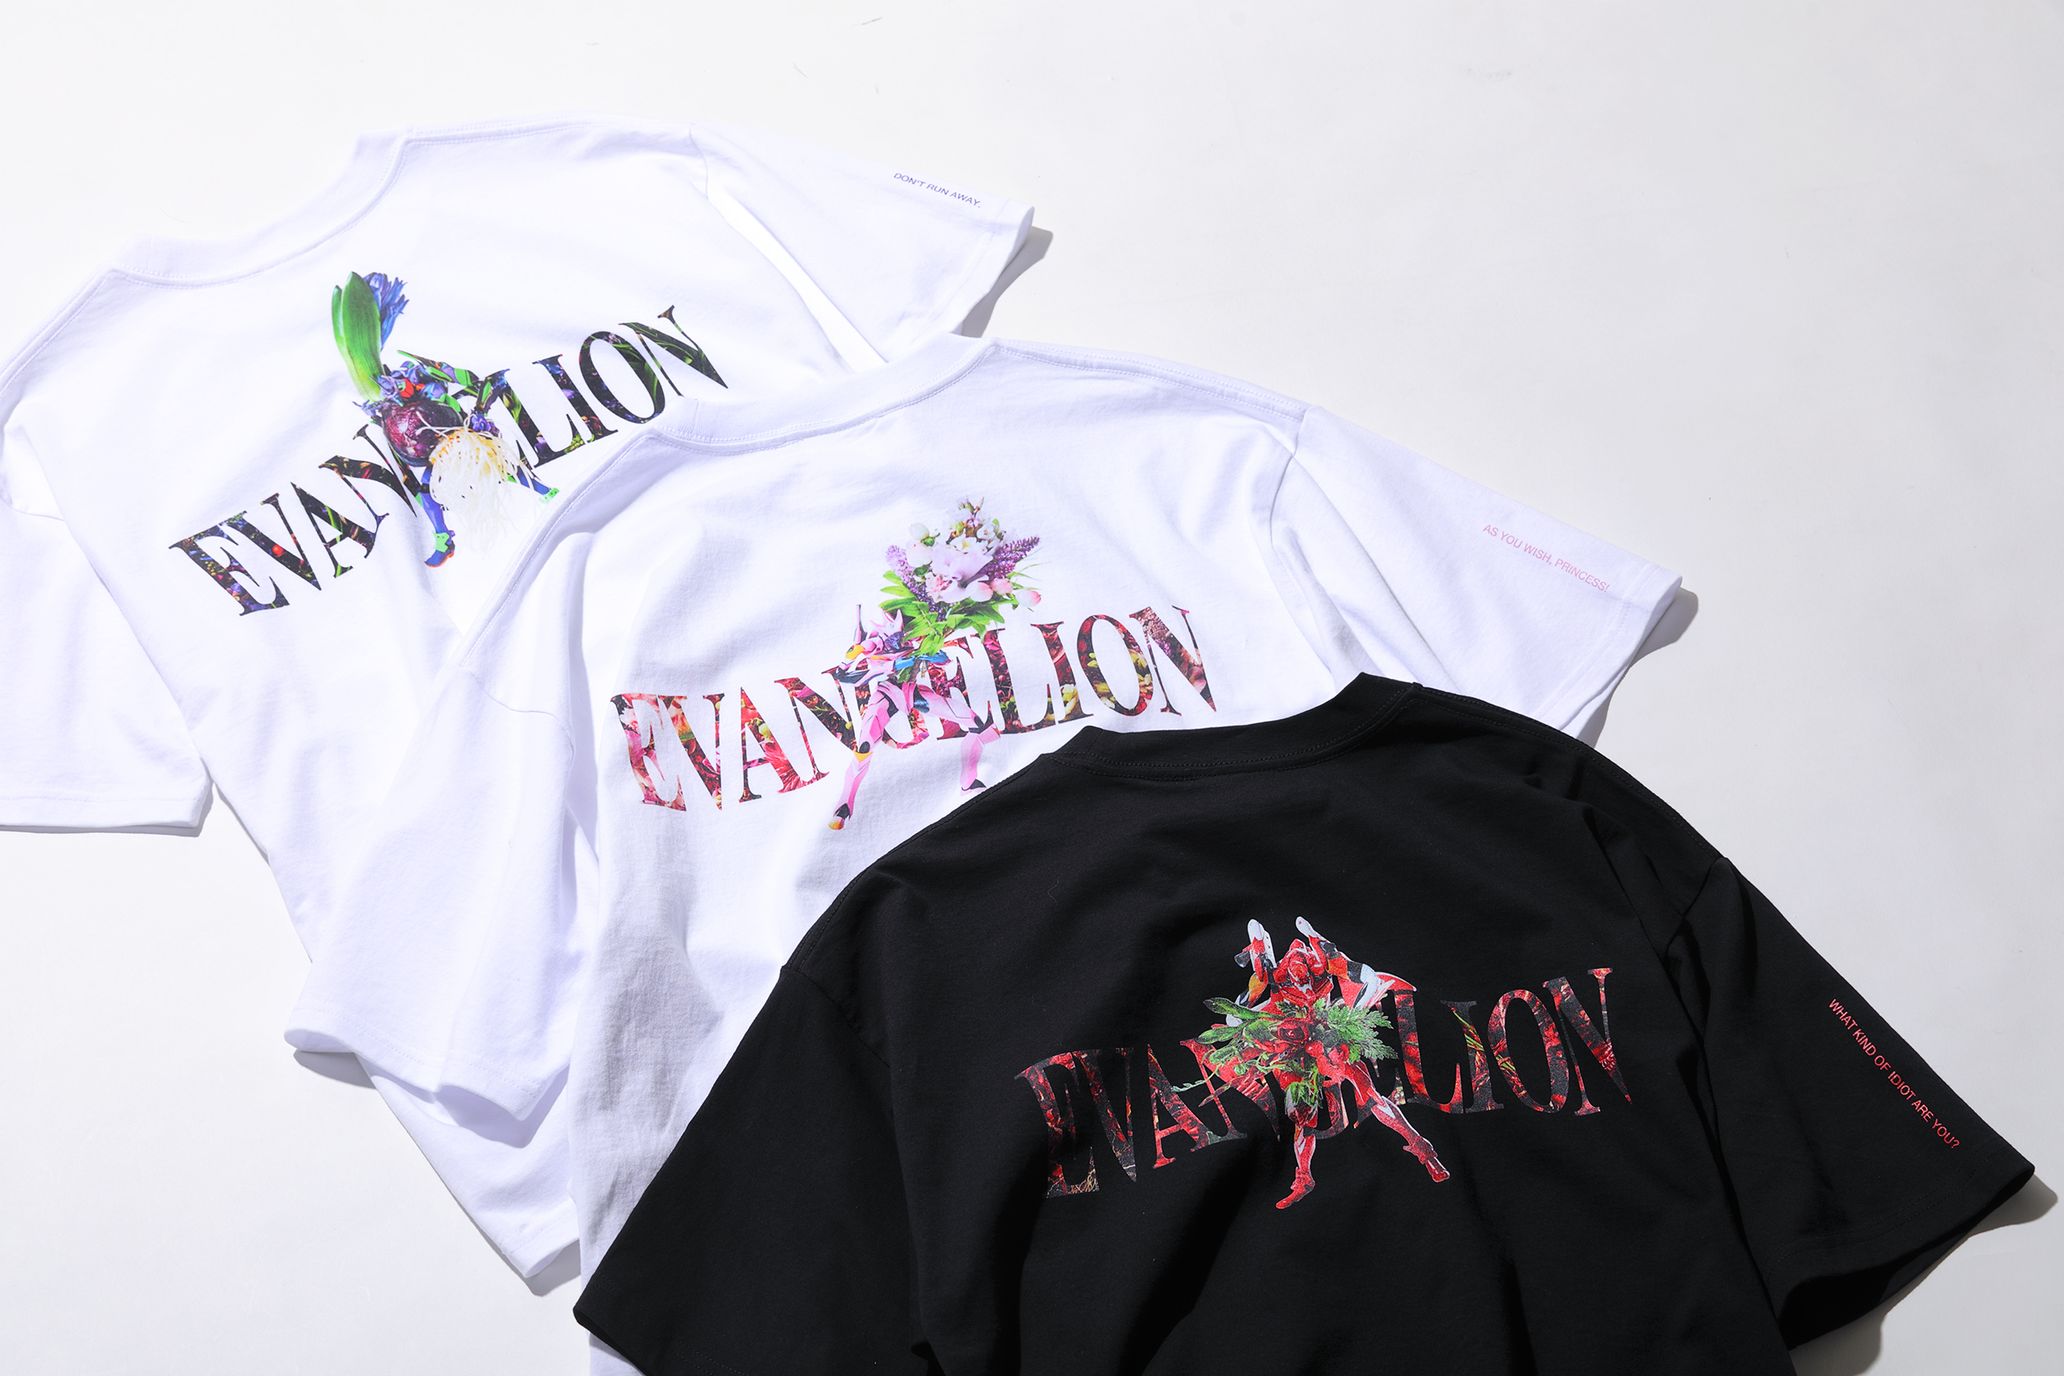 Evangelion and Flower Artist Group AMKK's Co-produced Merch On 